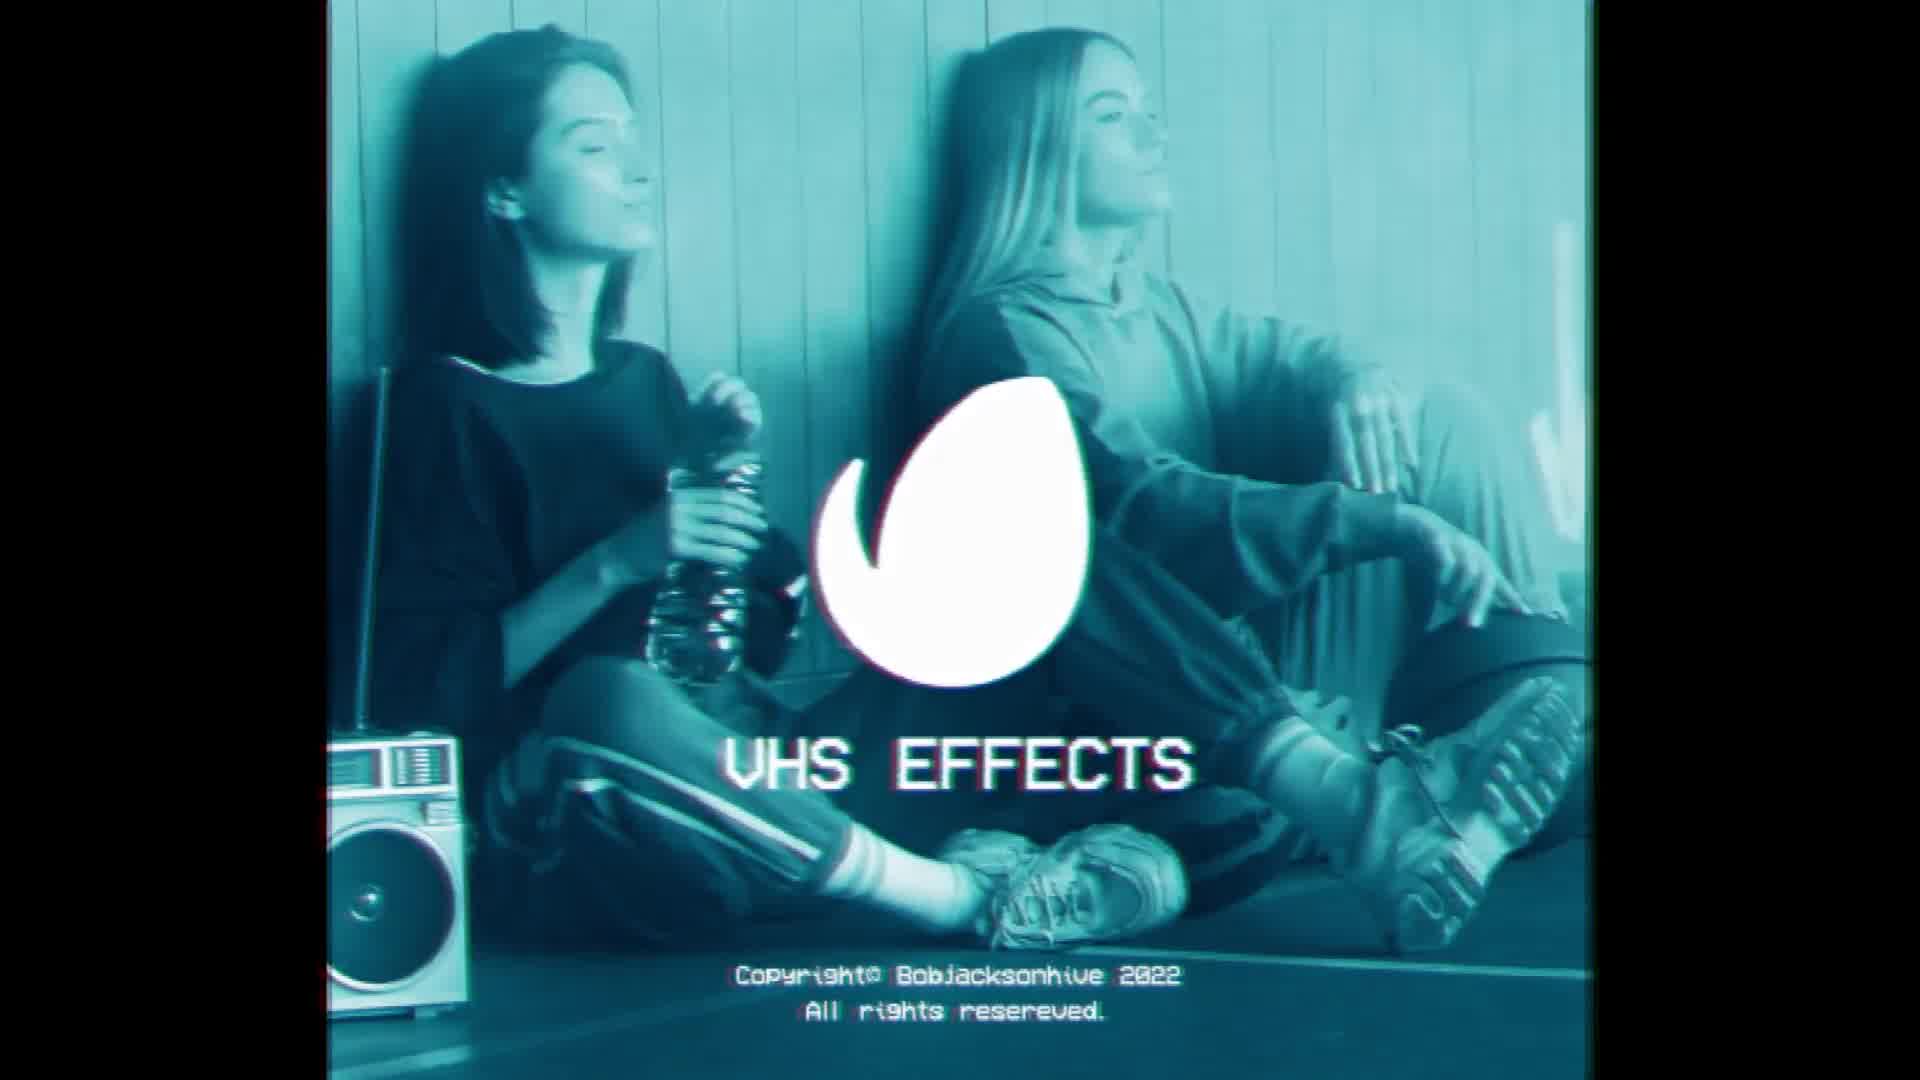 vhs after effects download